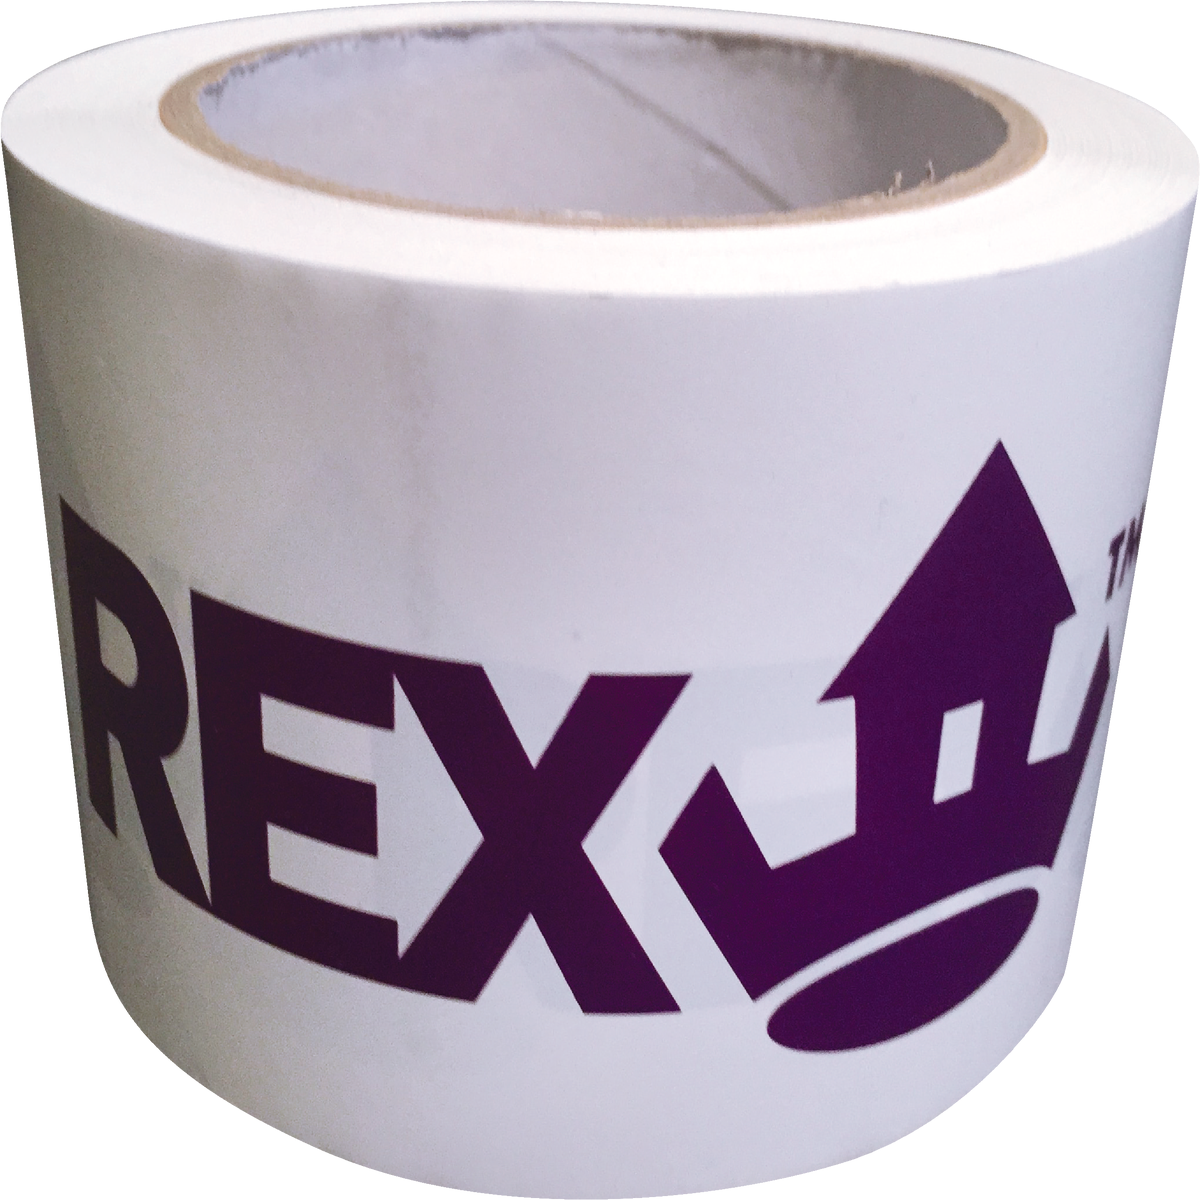 House Wrap Seaming Tape